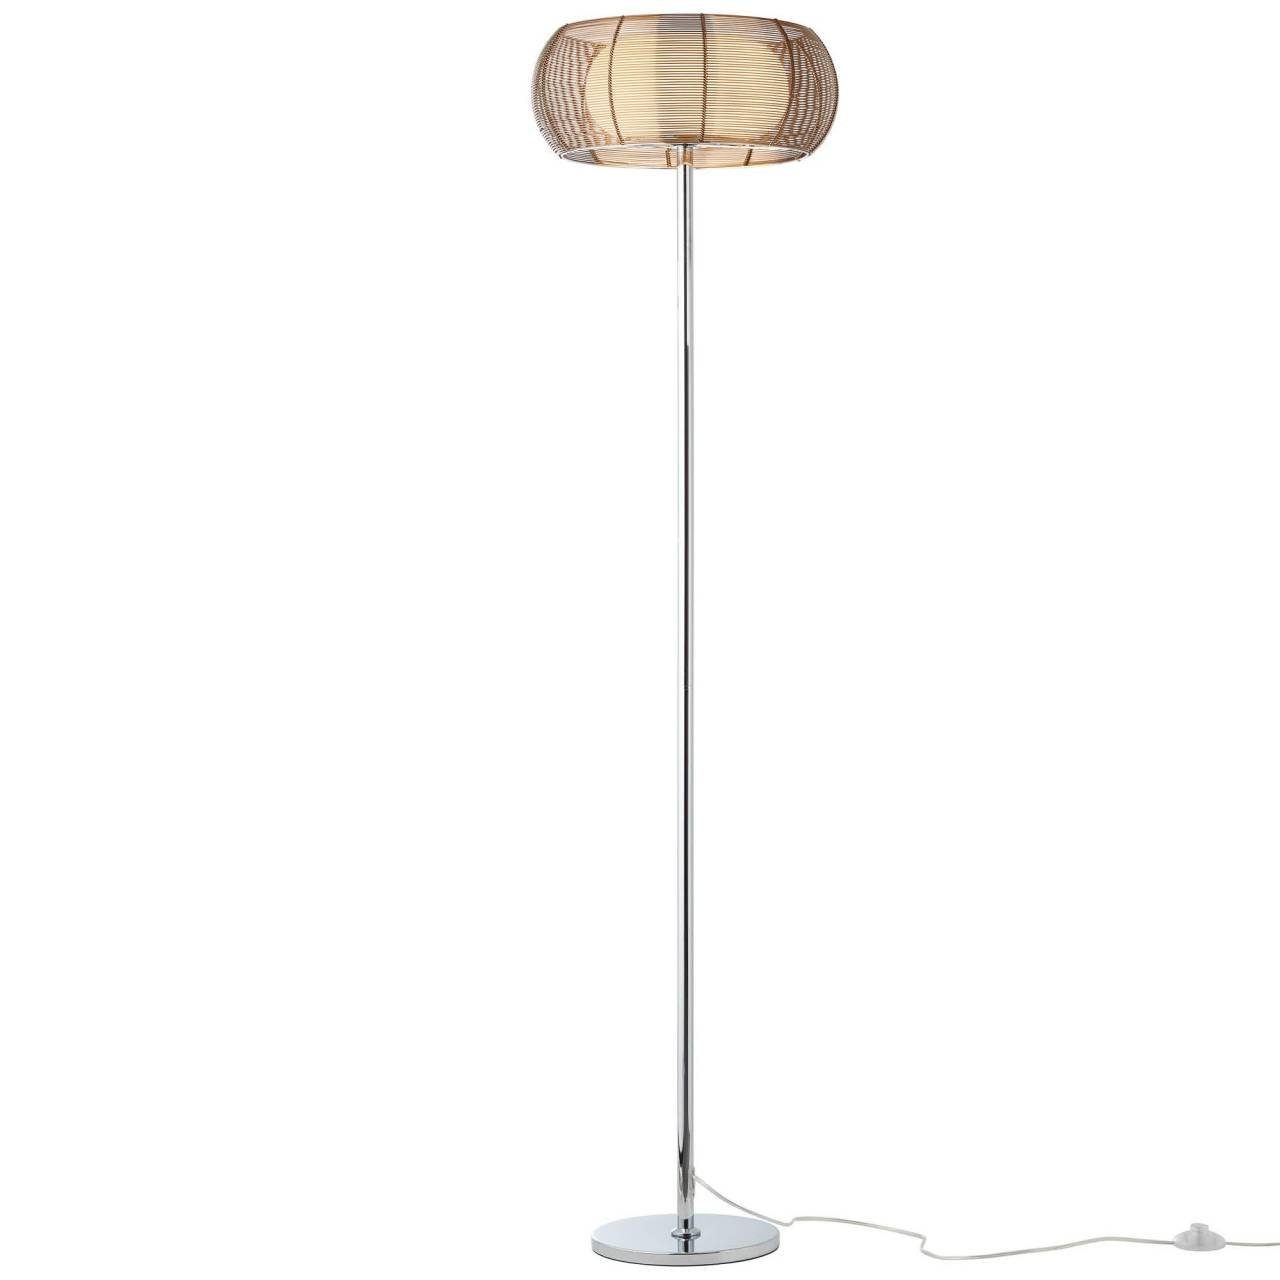 Relax Relax, 2flg 2x g.f. Stehlampe Standleuchte 30W, Lampe Brilliant bronze/chrom E27, No A60,